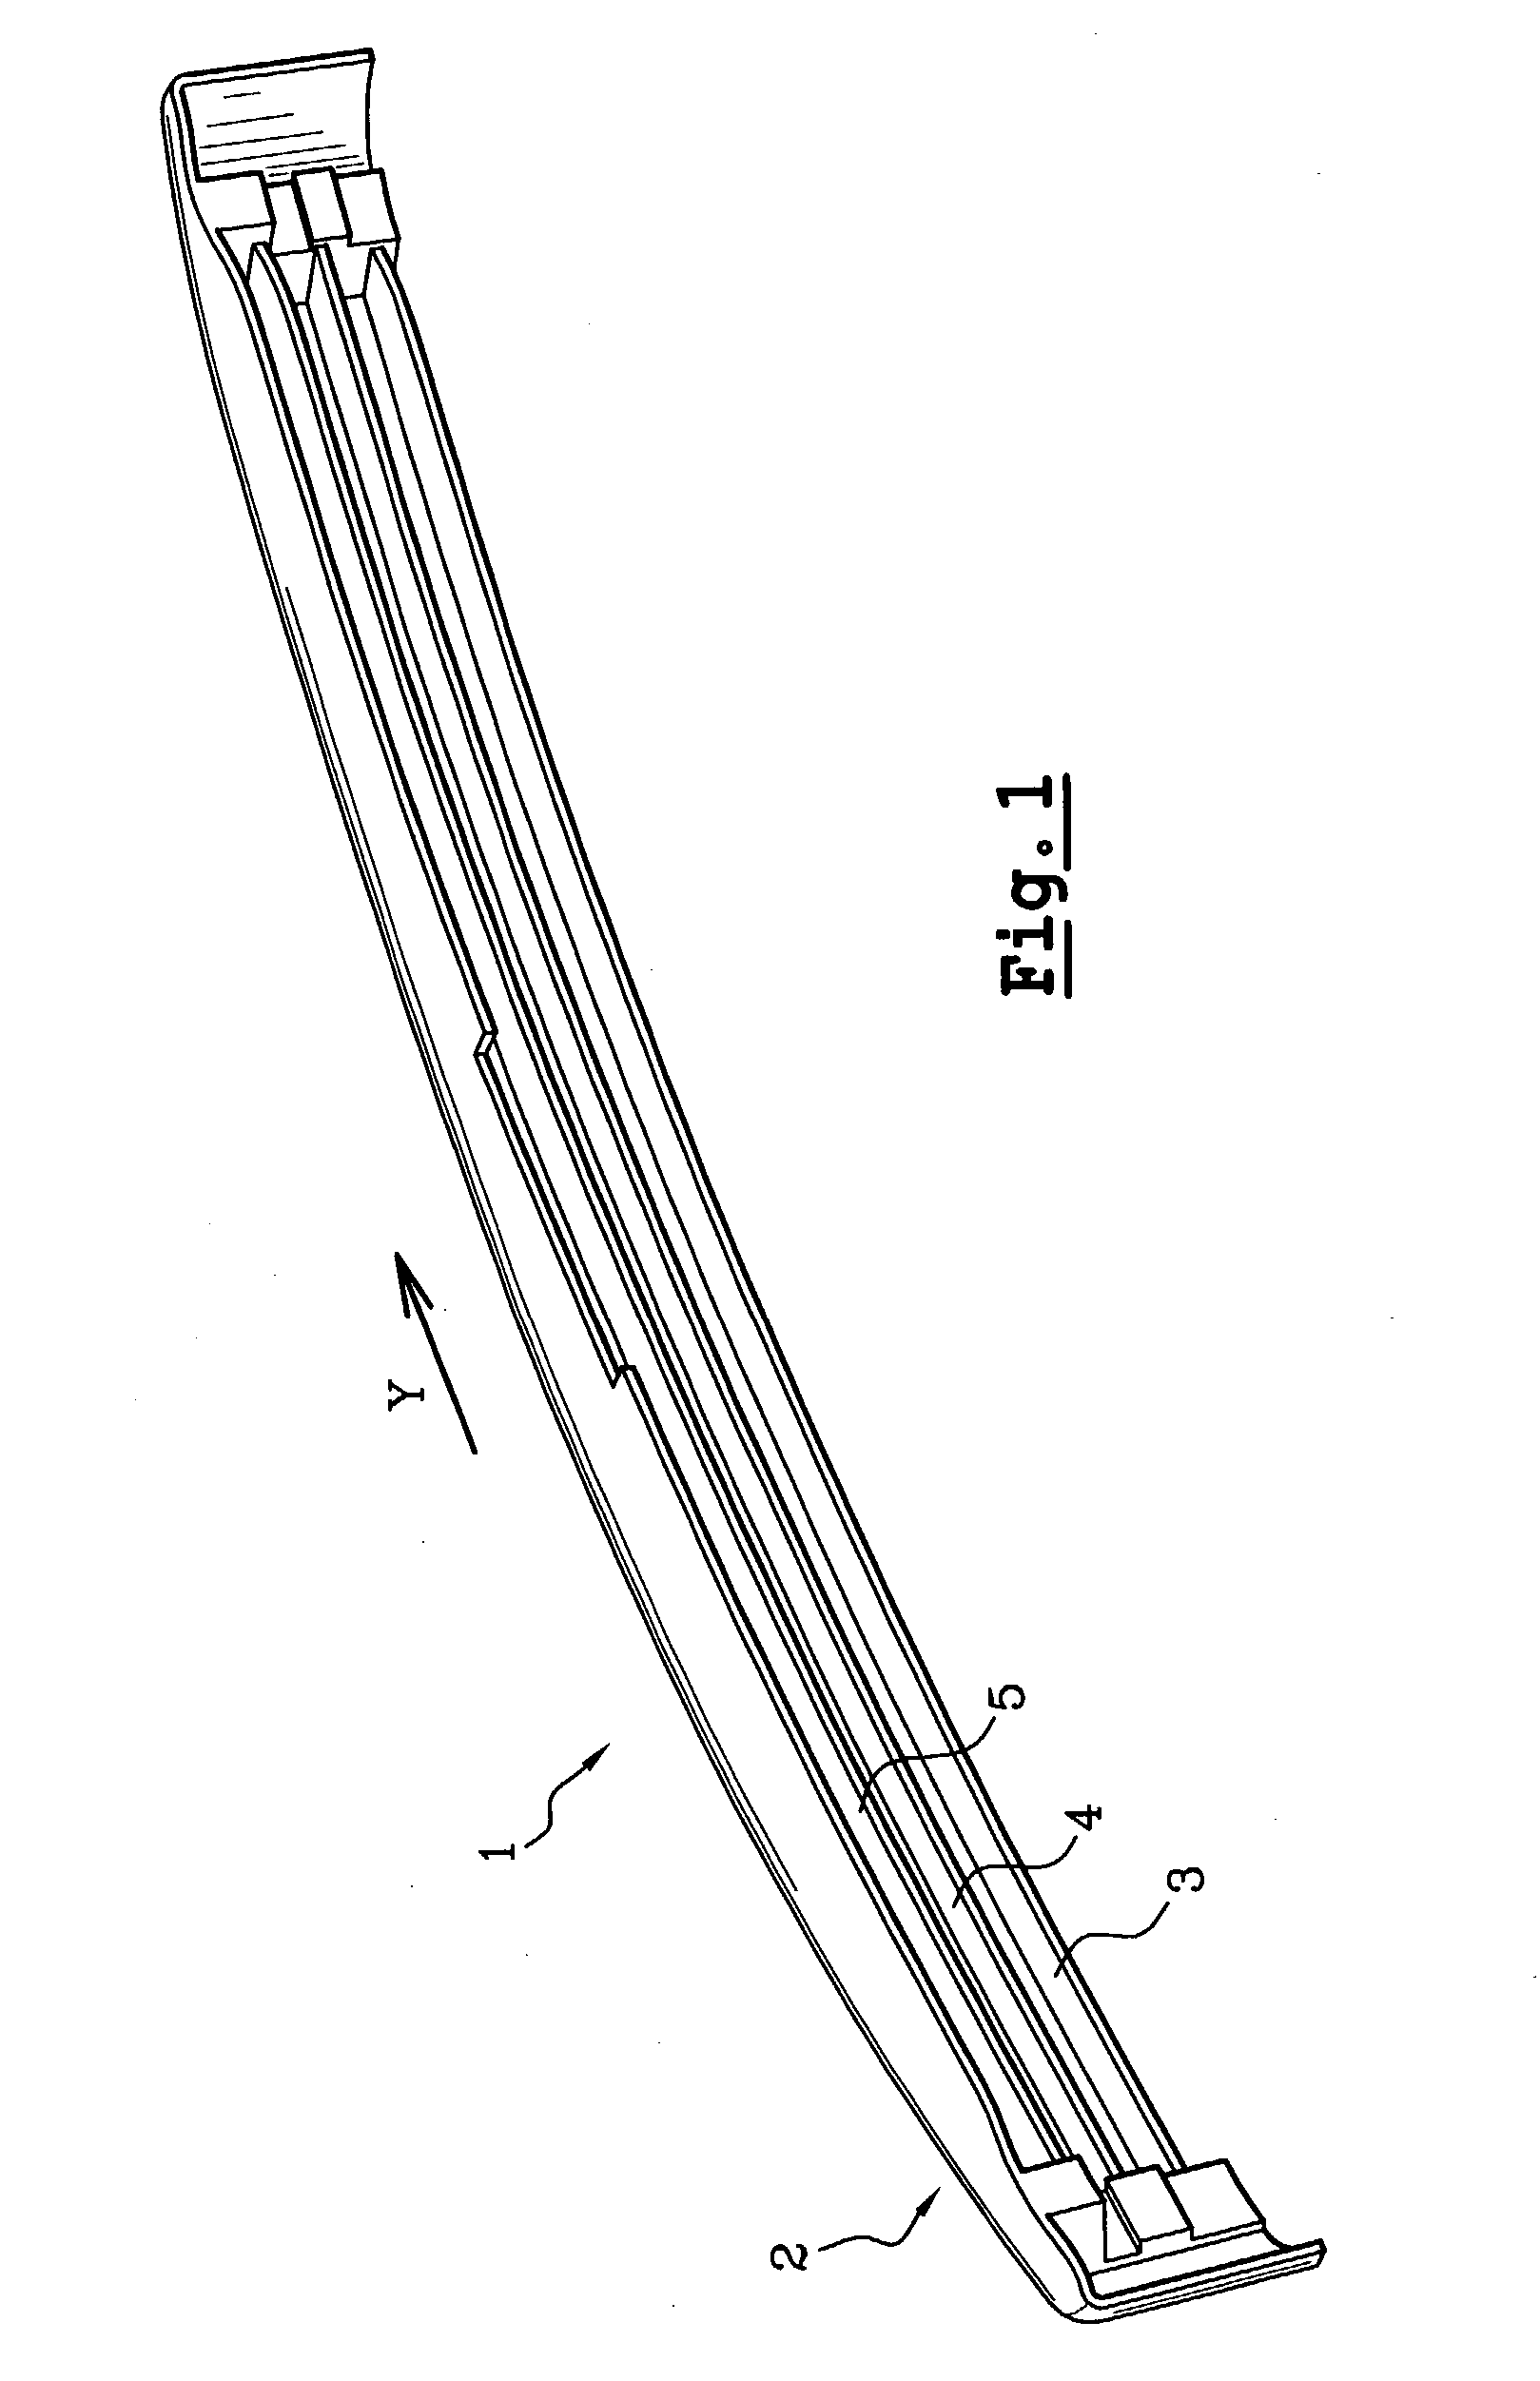 Energy absorber for interposing between a rigid beam and a bumper skin, and an energy-absorbing assembly